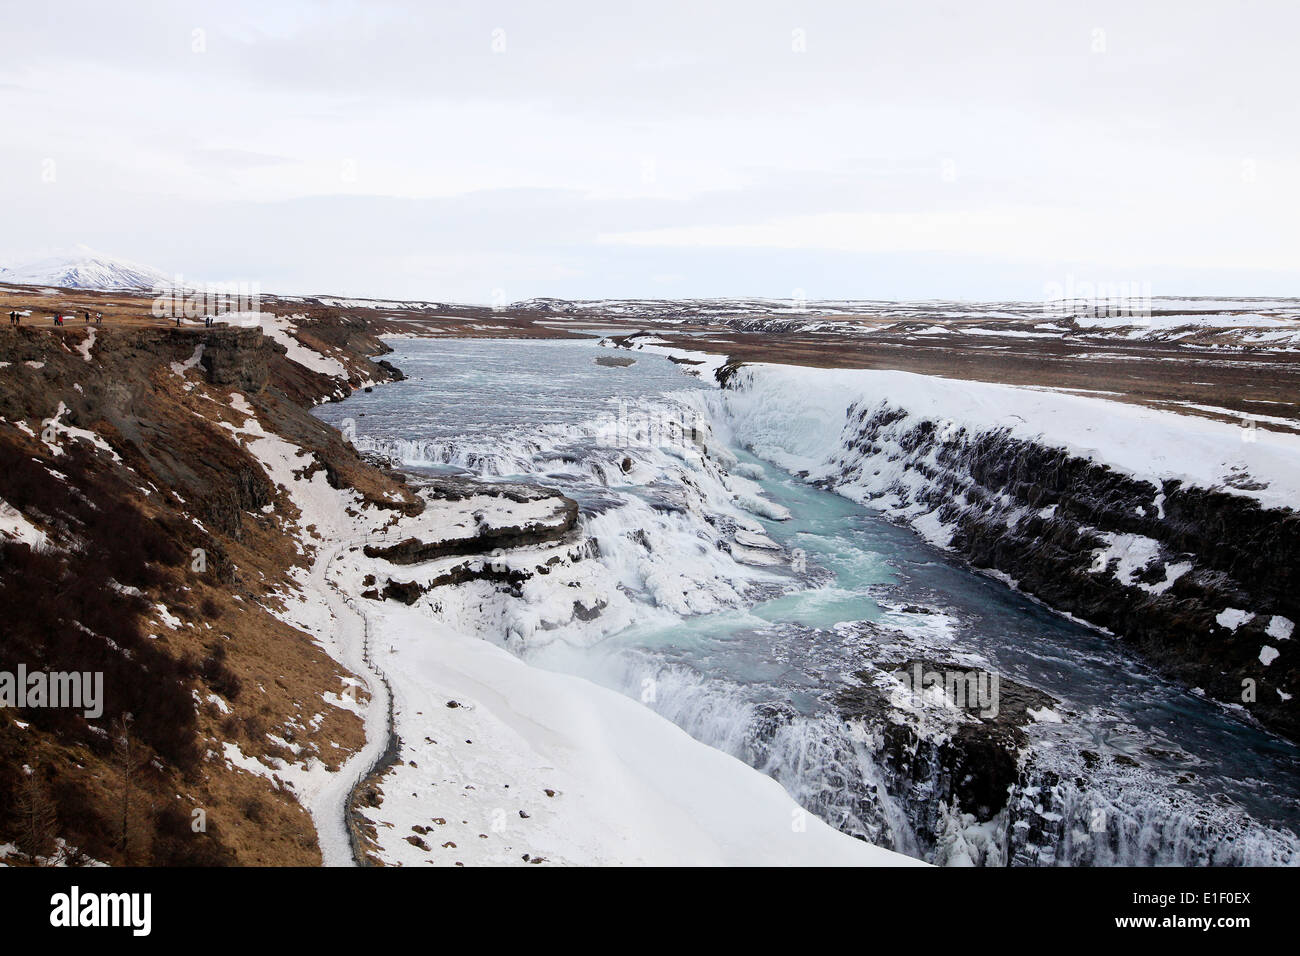 The river Hvita river flows through the Gullfoss gorge and over the Gullfoss waterfall in southwest Iceland. Stock Photo